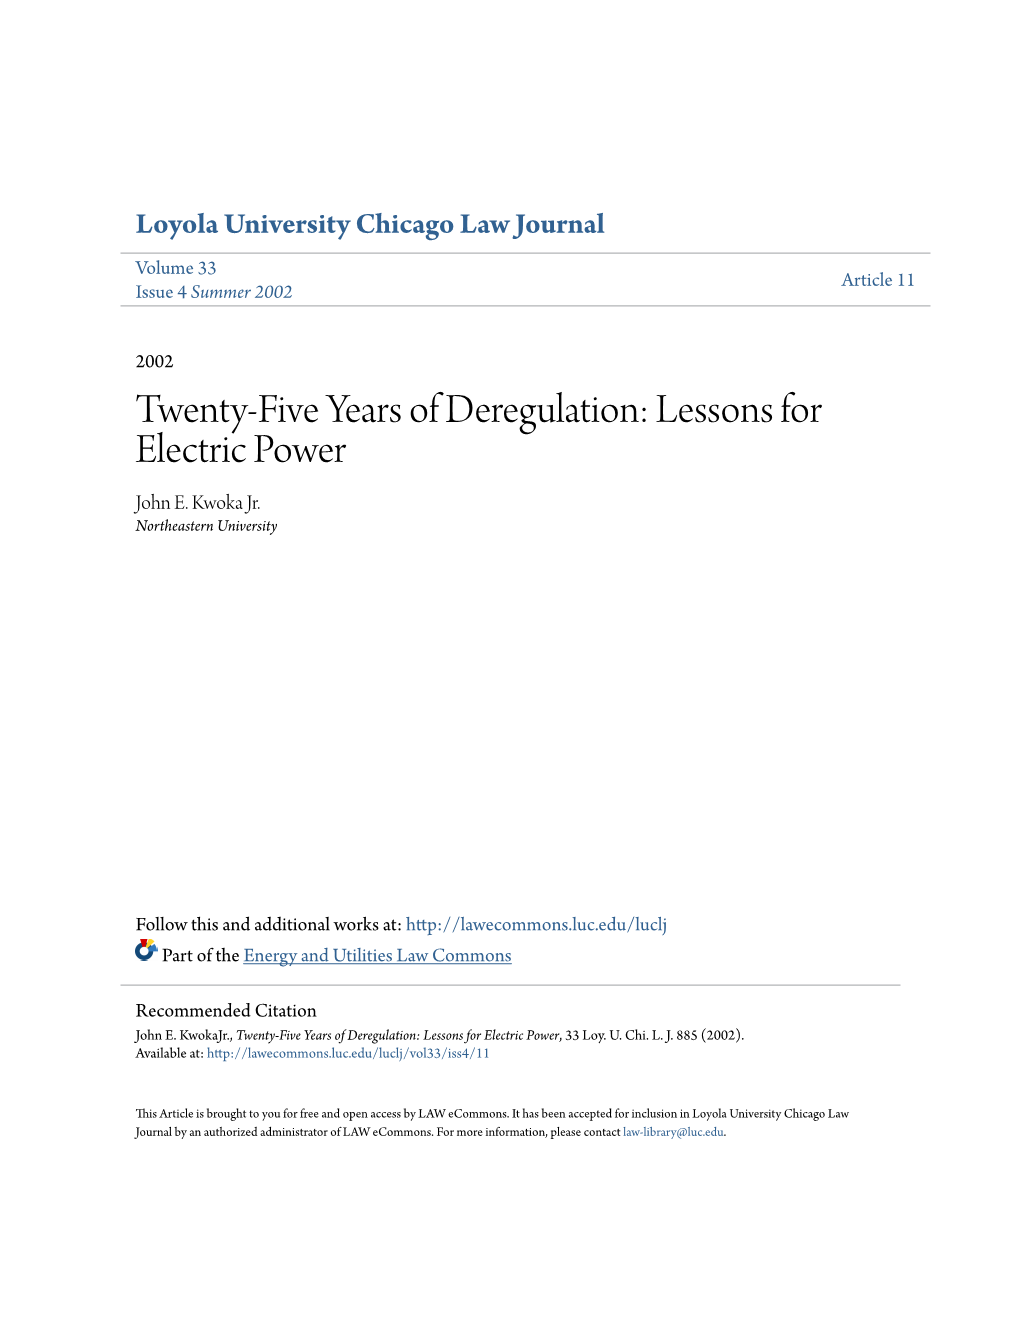 Twenty-Five Years of Deregulation: Lessons for Electric Power John E